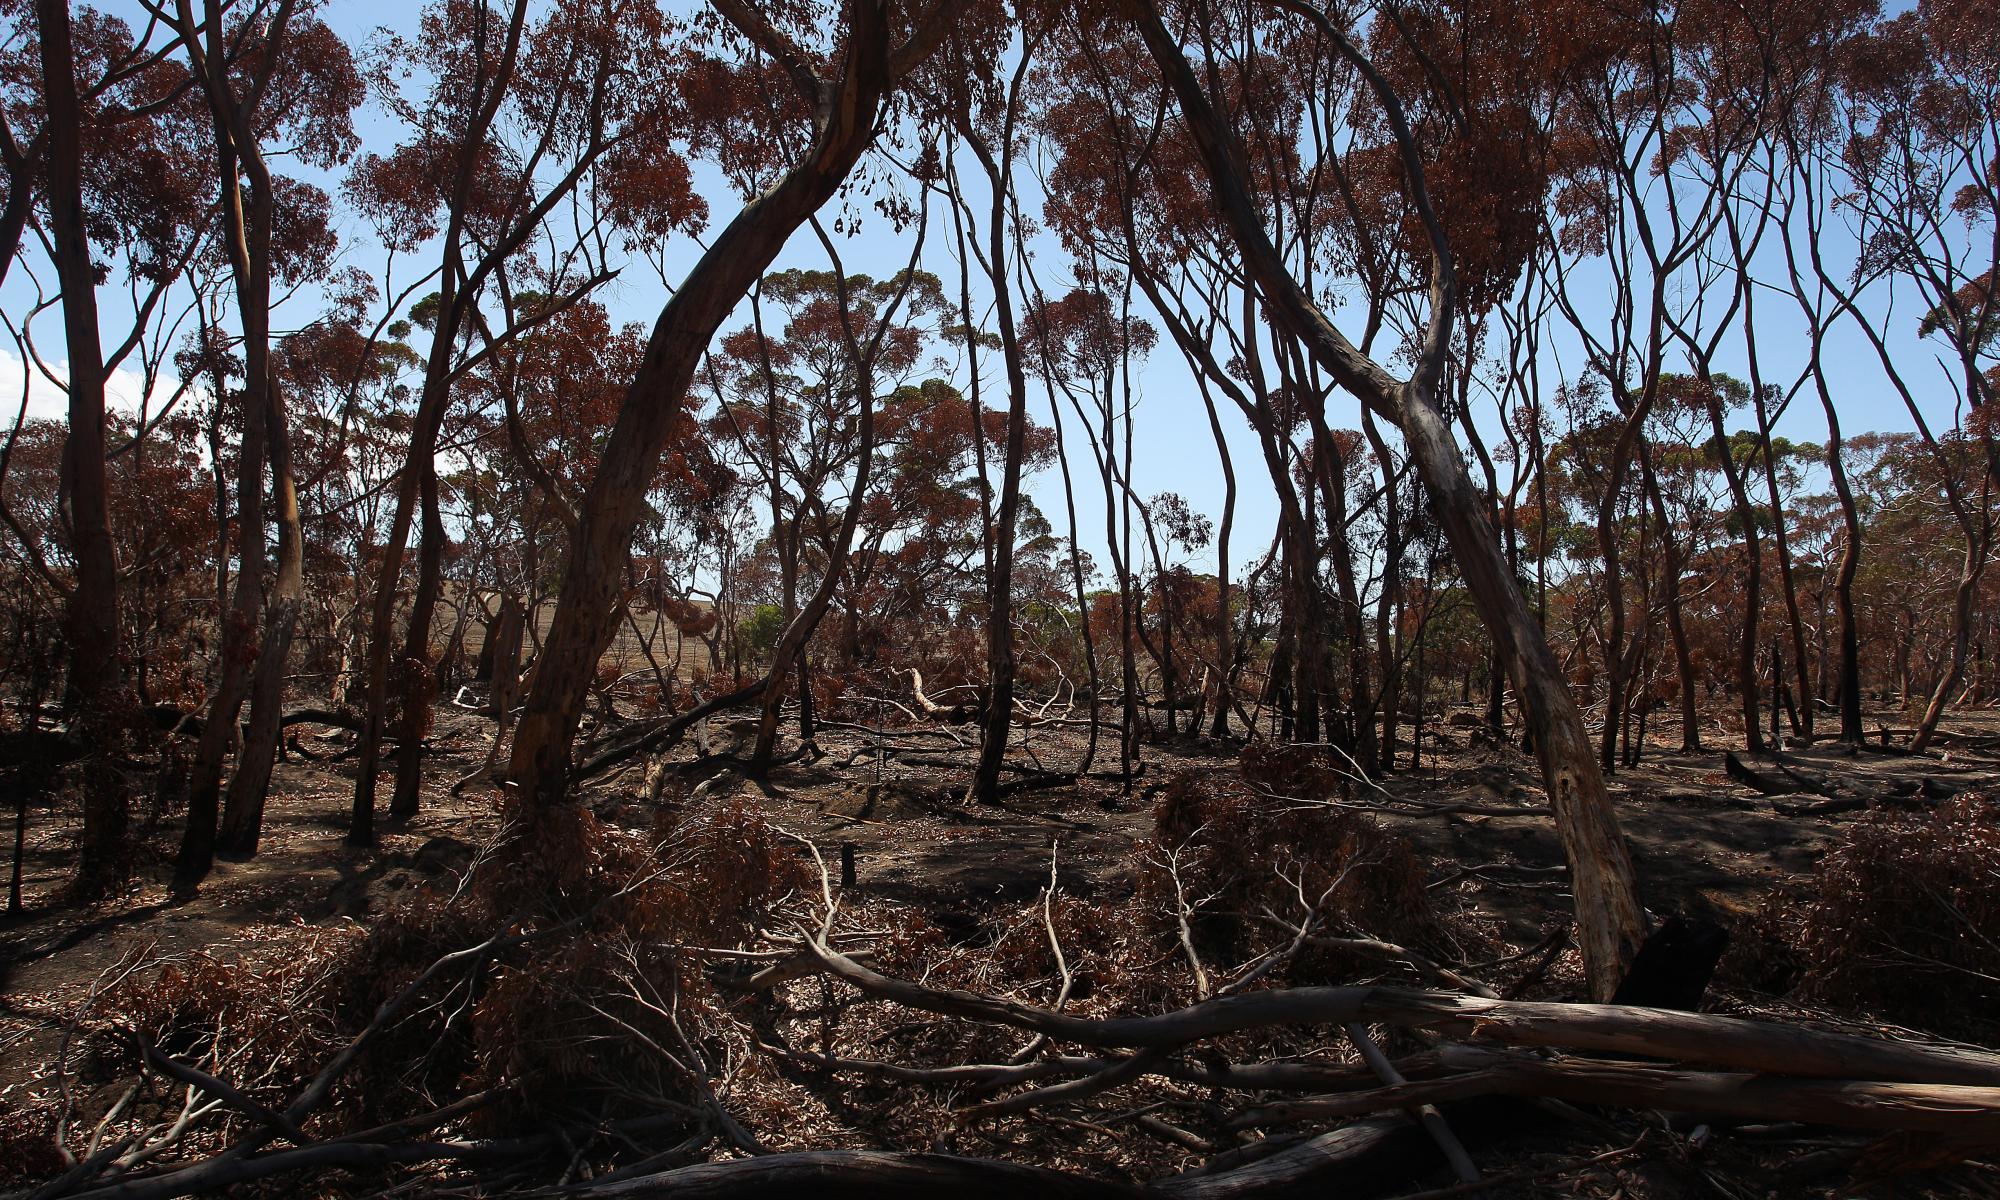 Bushfires leave 470 plants and 200 animals in dire straits – government analysis